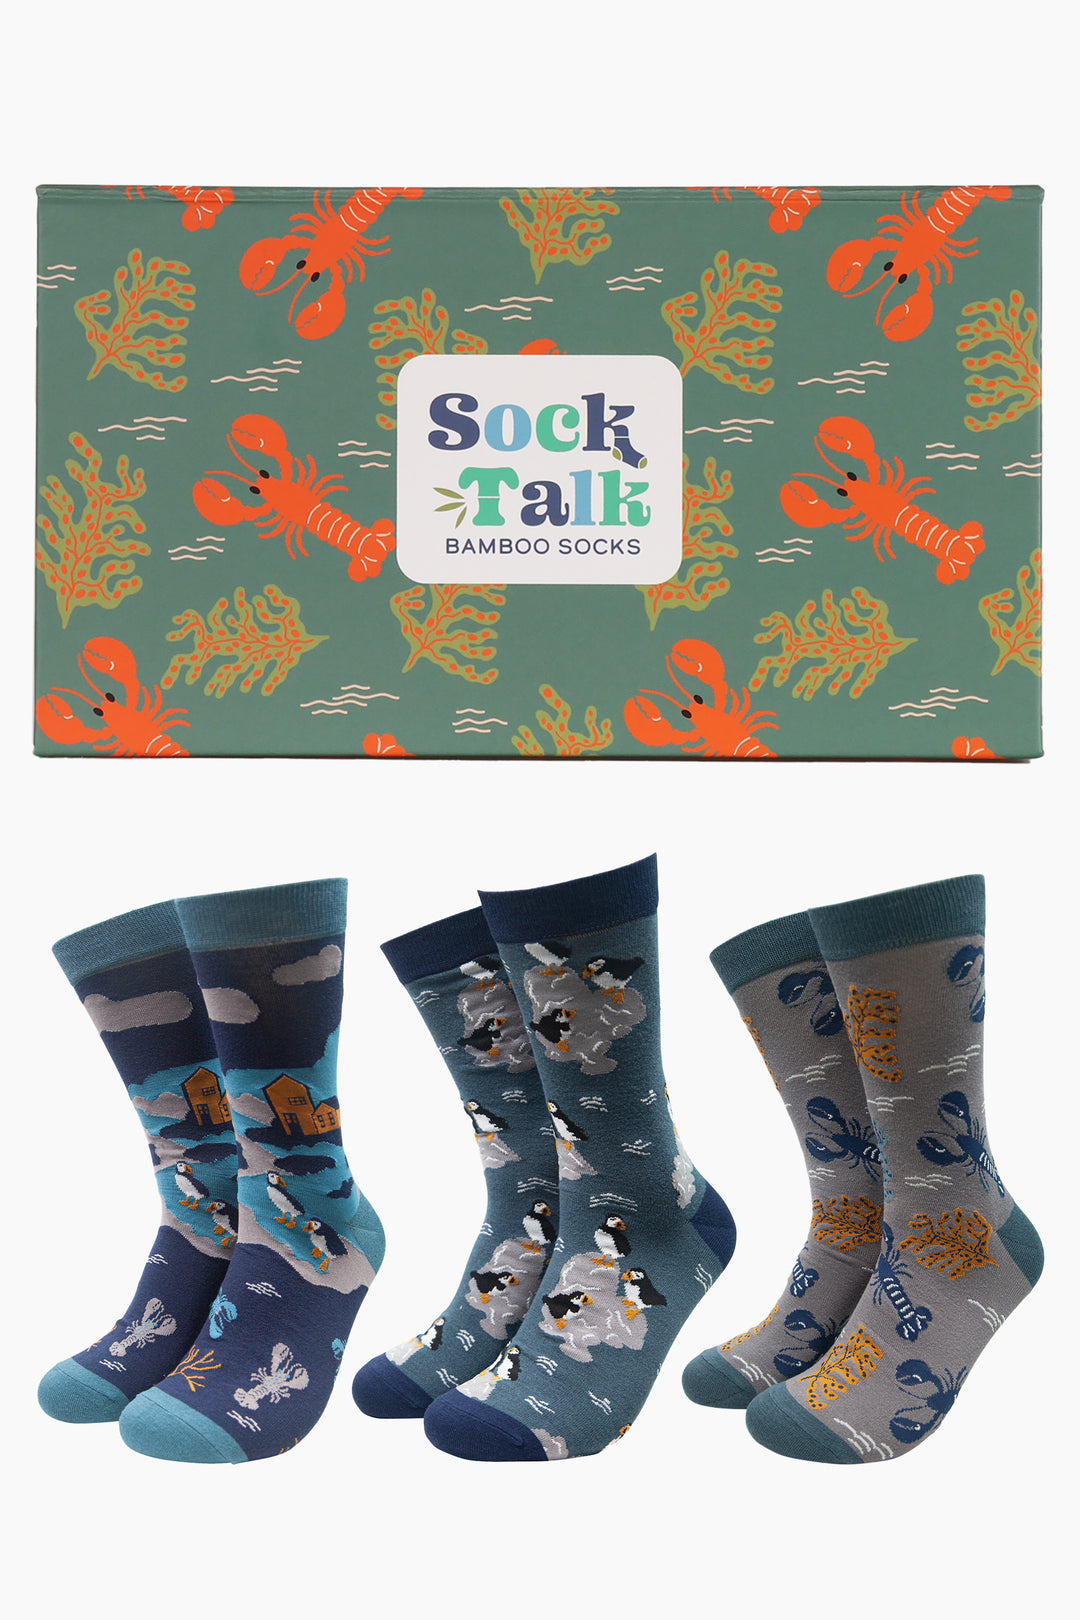 three pairs of mens bamboo socks, featuring lobsters and puffins in a green and red lobster patterned gift box